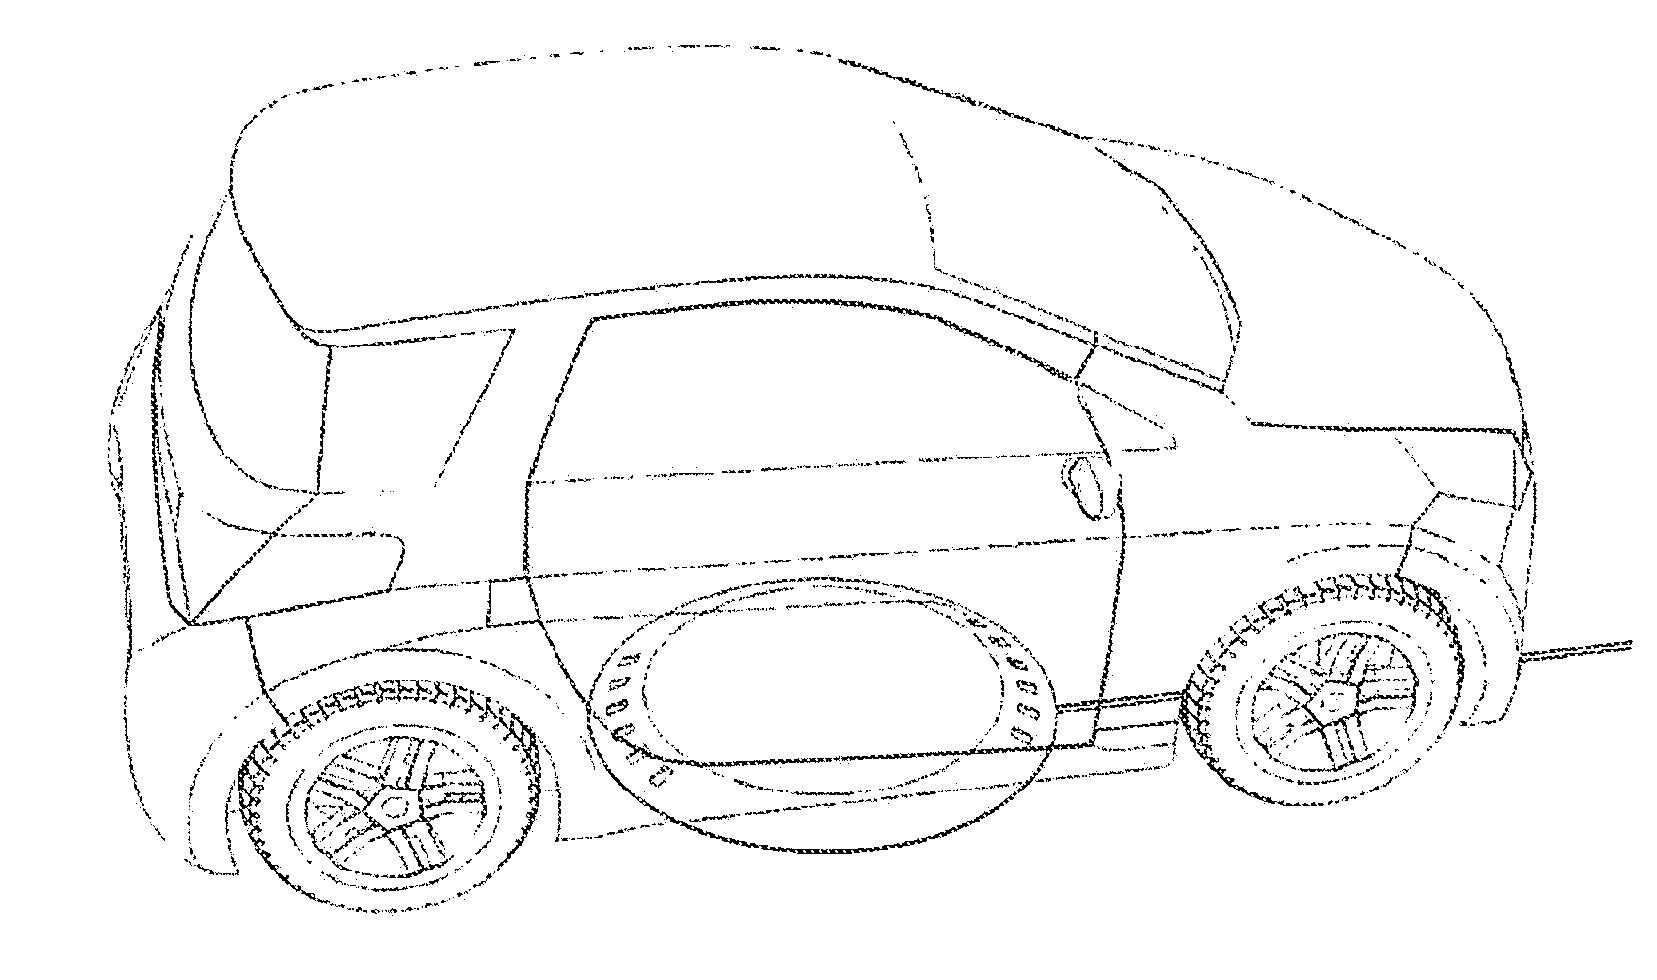 System for inductively charging vehicles, comprising an electronic positioning aid